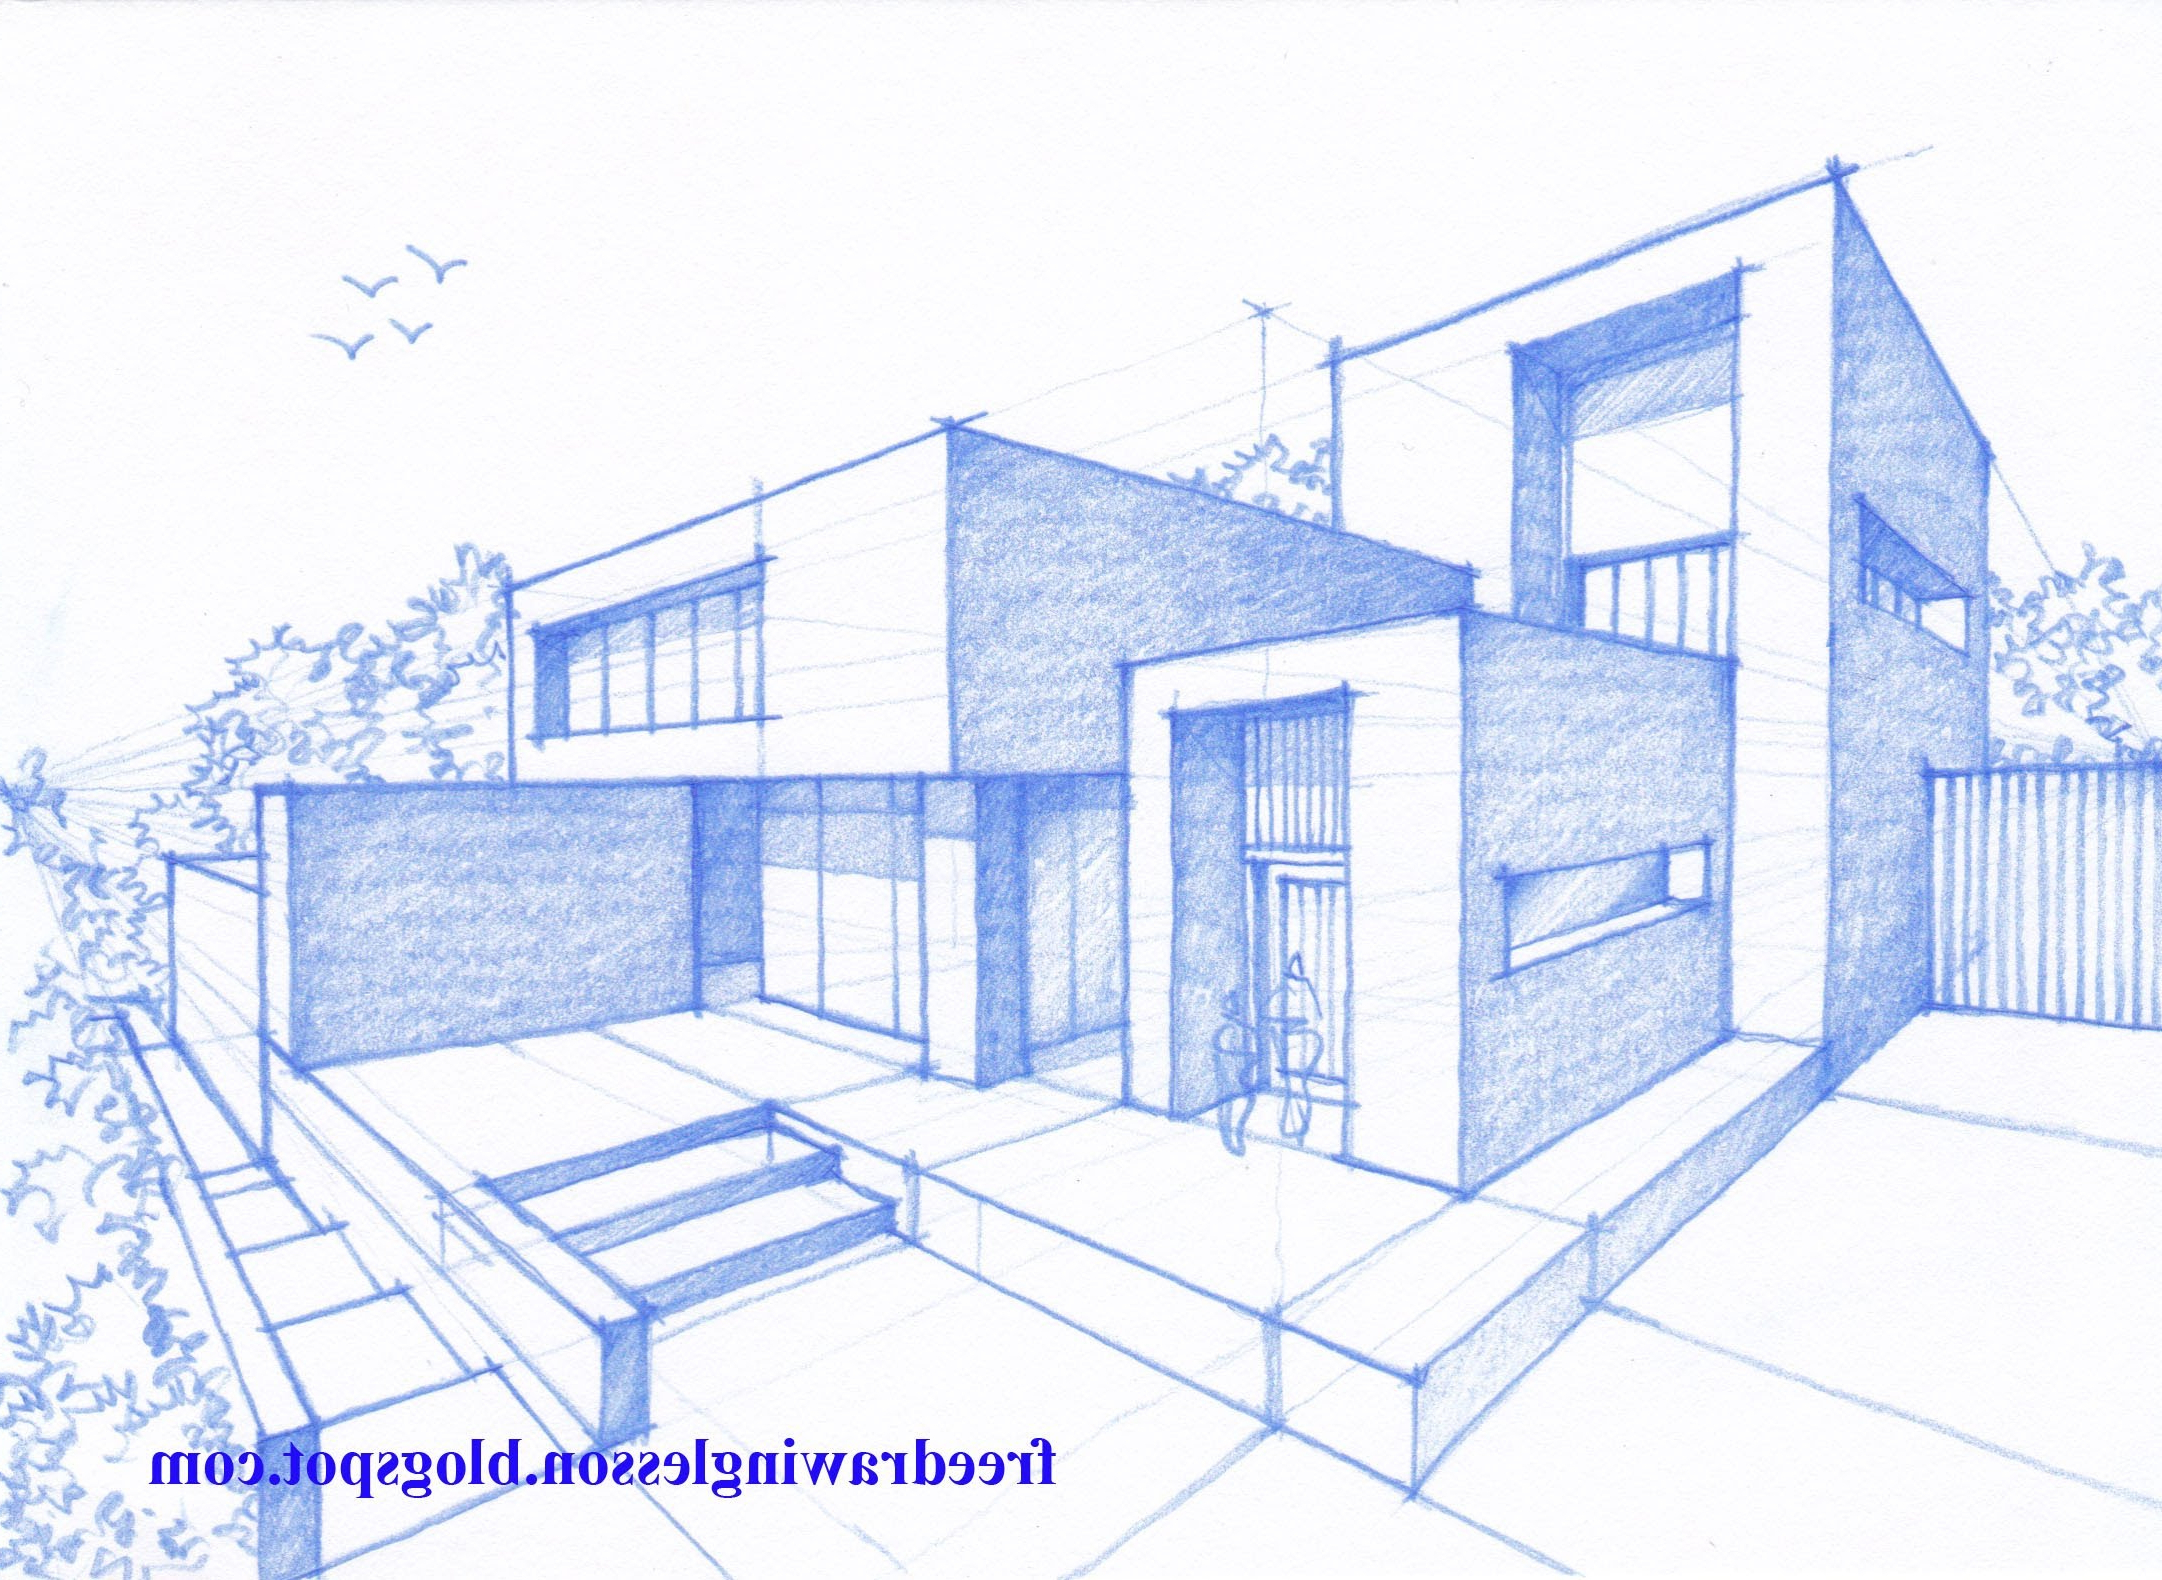  Modern House Sketch at PaintingValley com Explore 